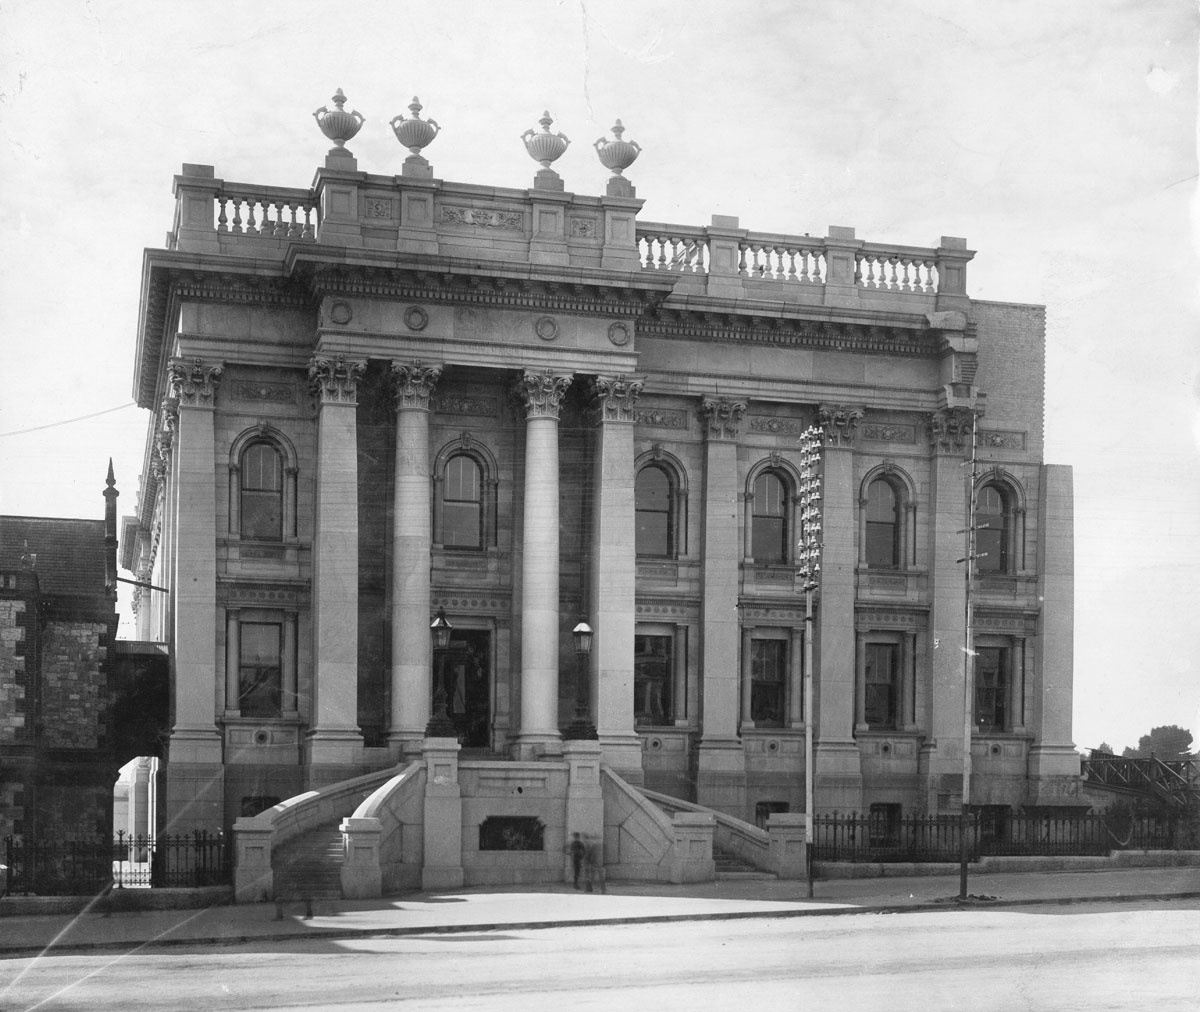 The partially-completed Parliament House in 1928. Photo: State Library of South Australia